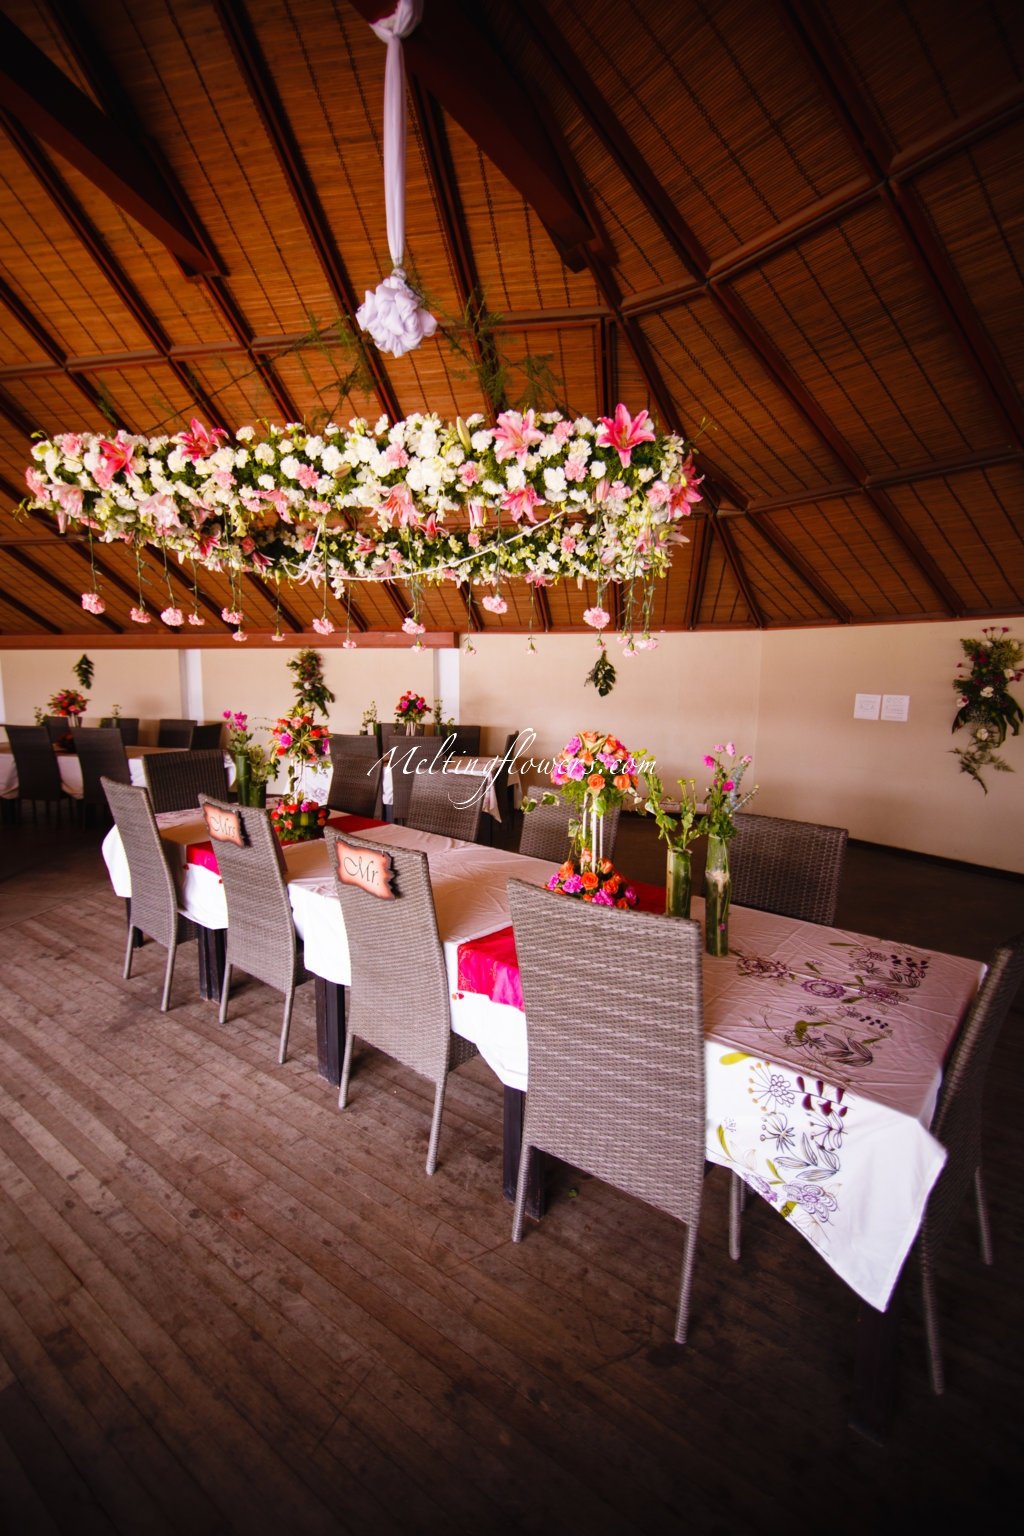 Engrossing Themes For The Grand Reception!